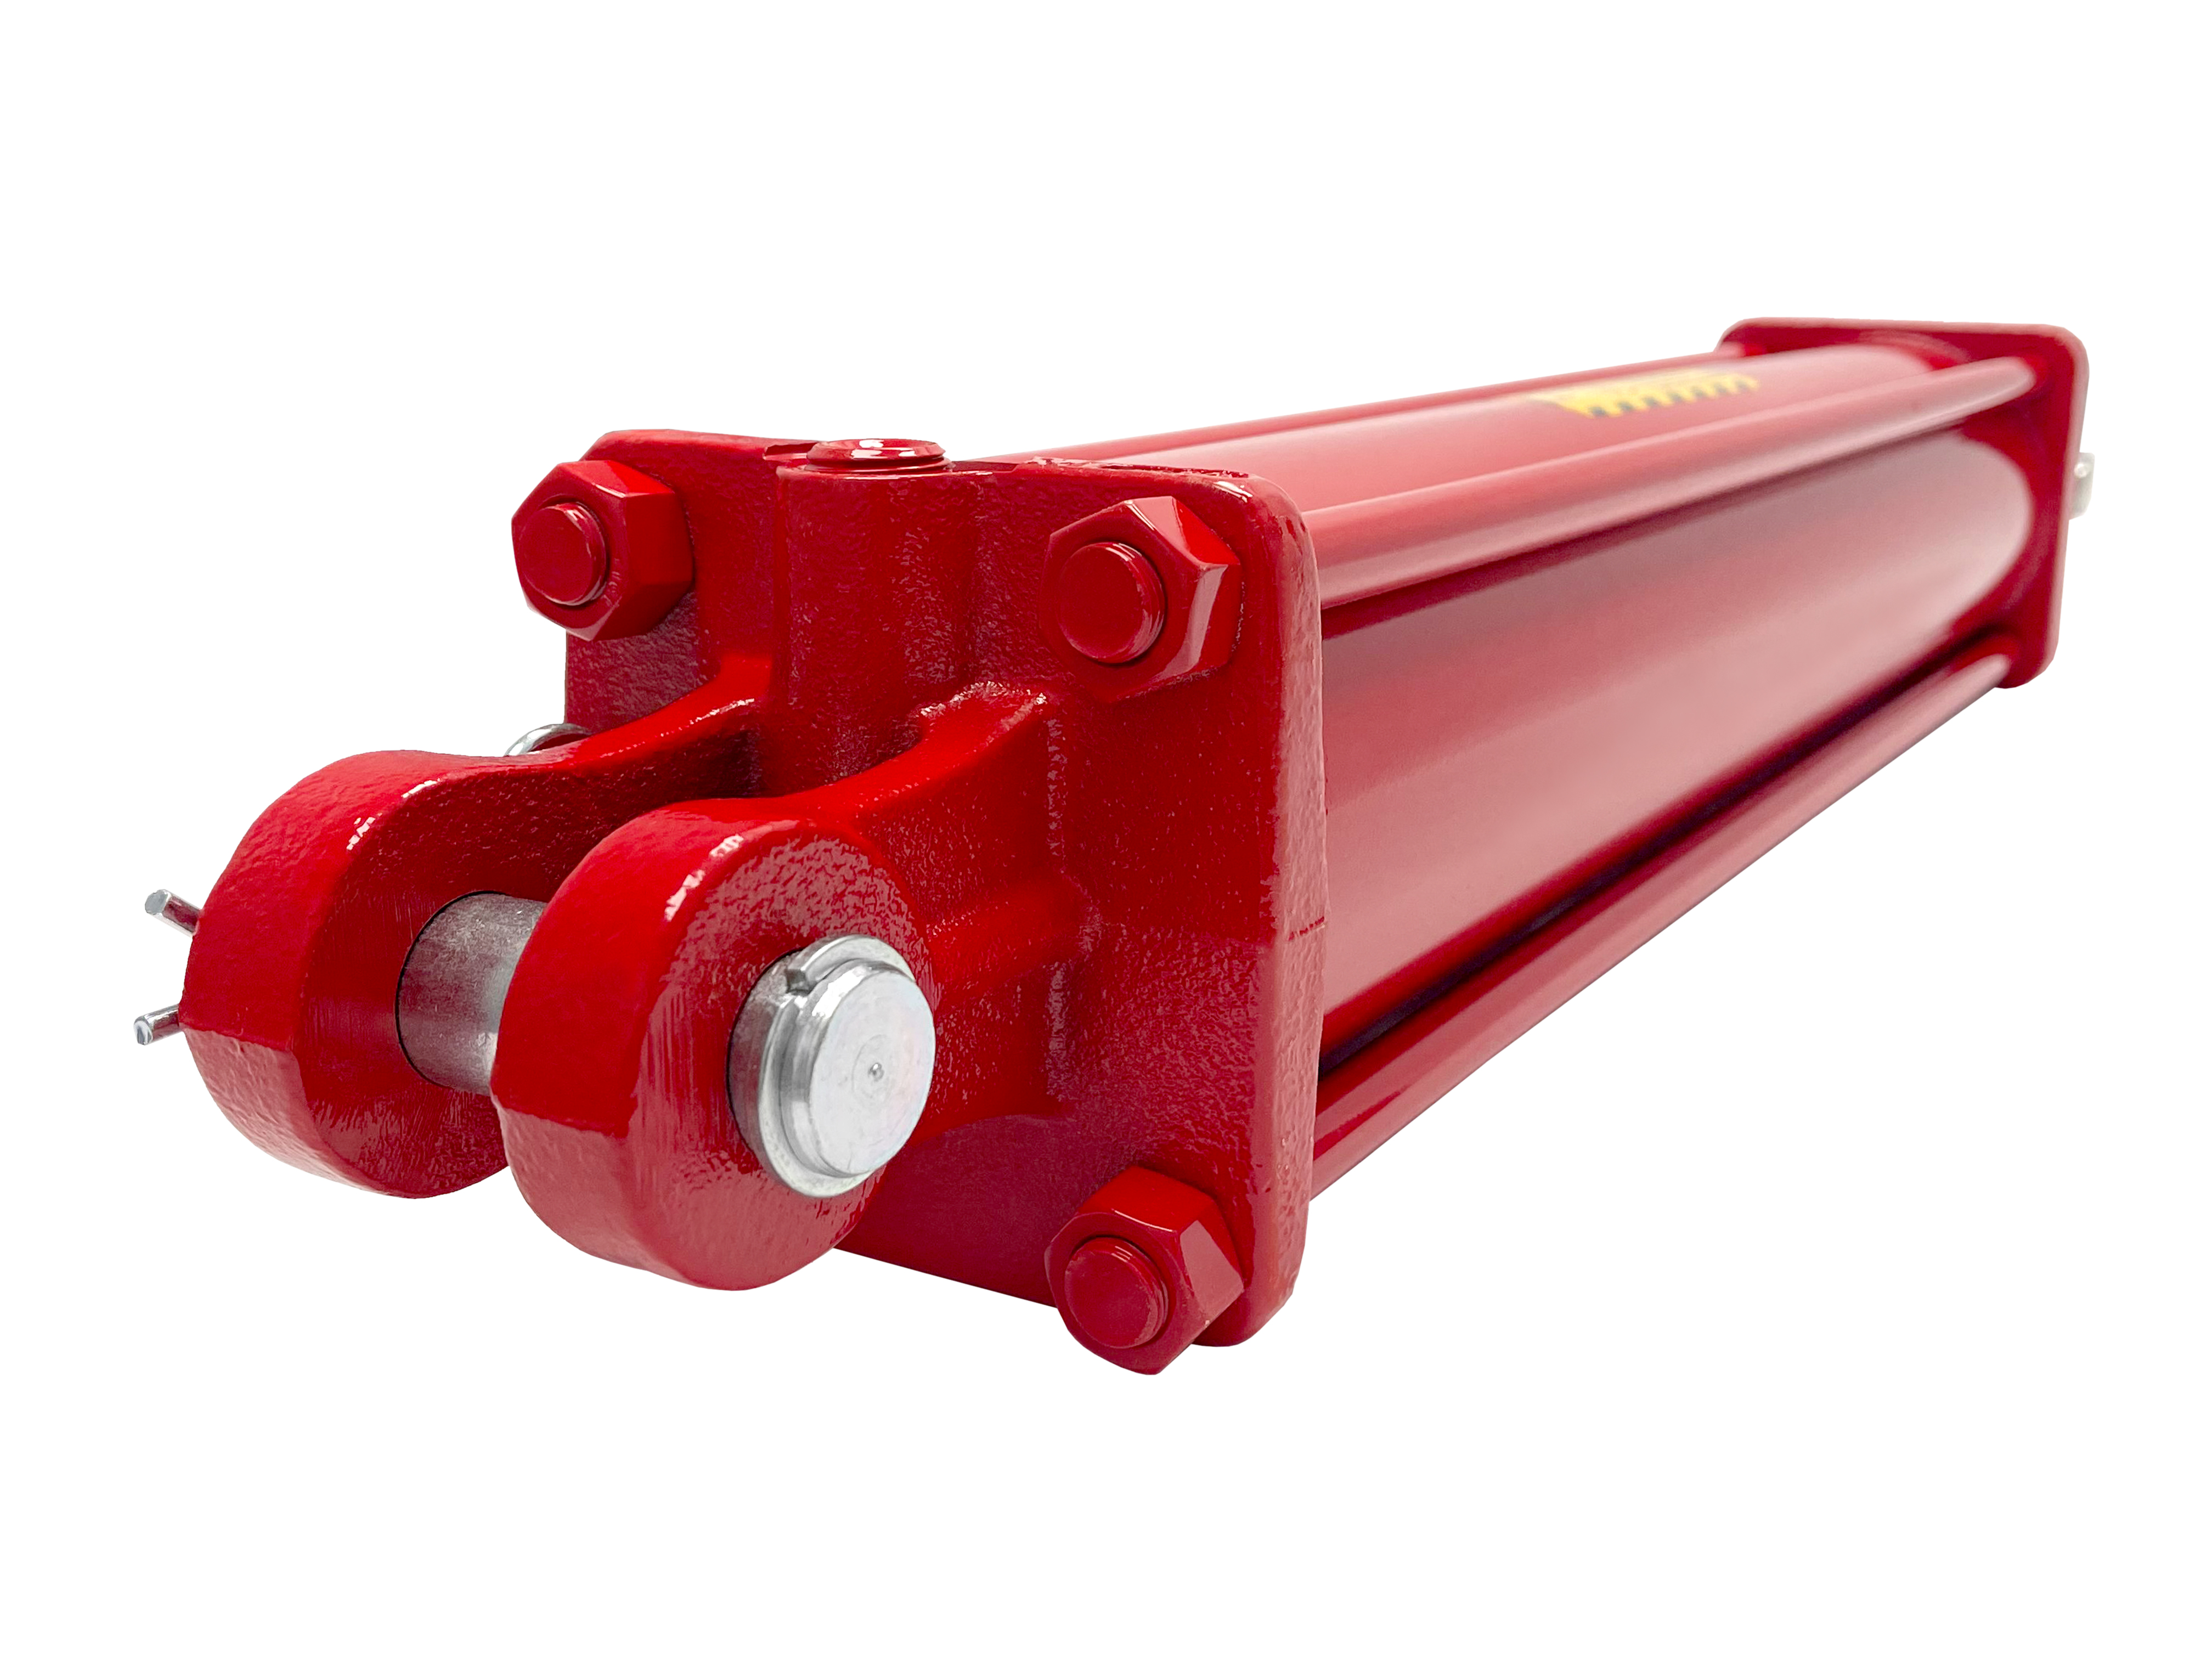 4 bore x 18 stroke CROSS hydraulic cylinder, tie rod double acting cylinder DB series | CROSS MANUFACTURING